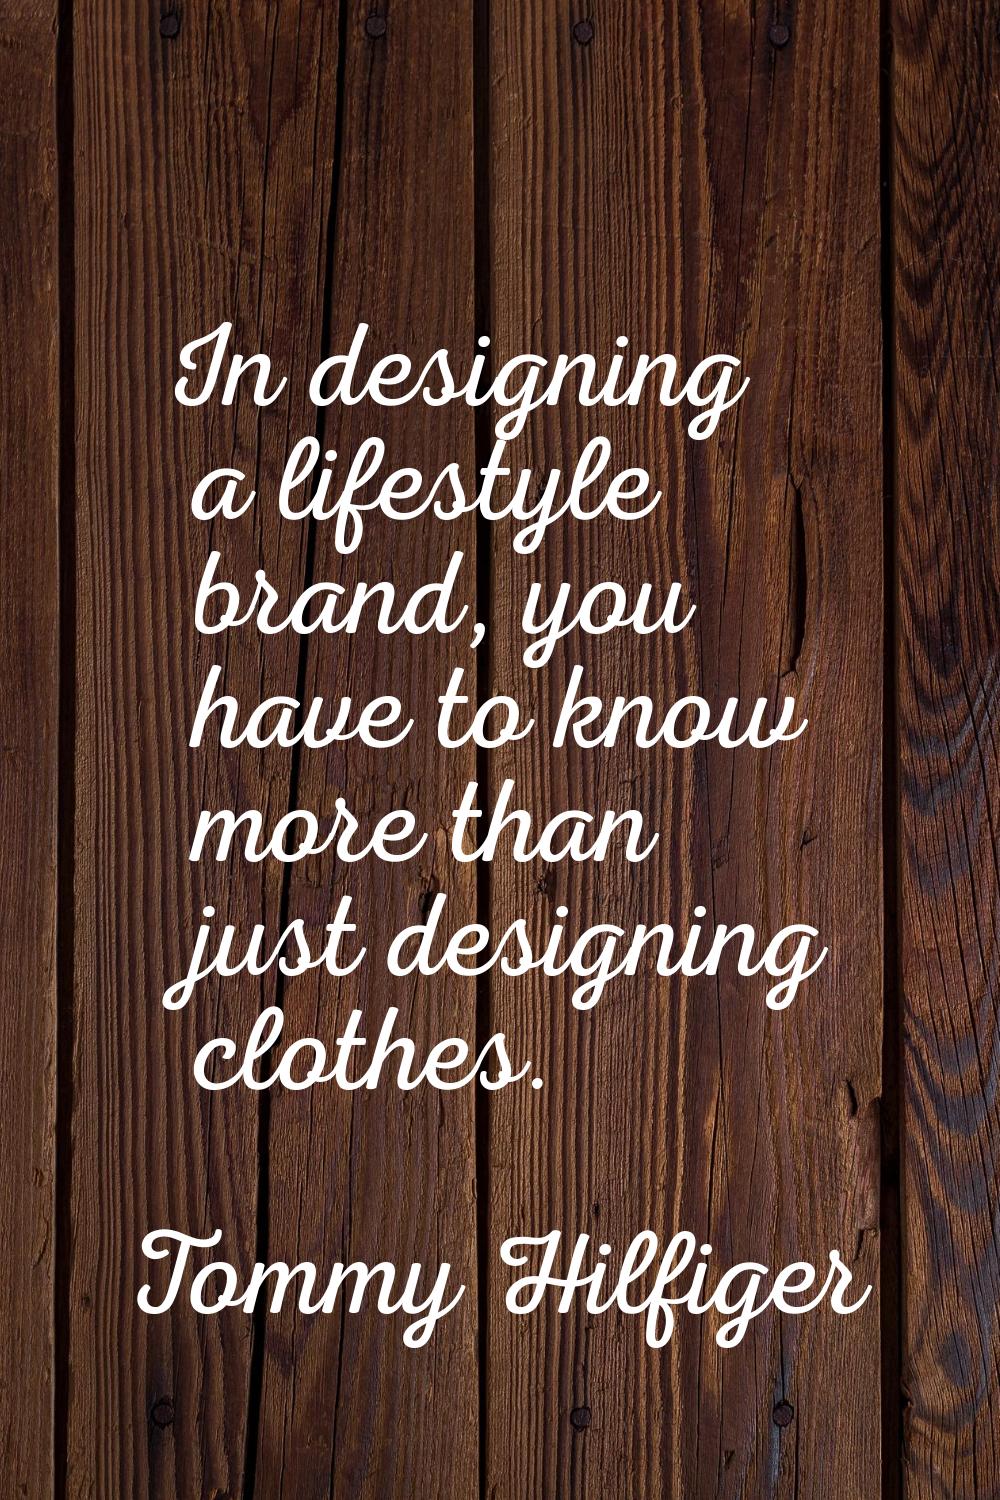 In designing a lifestyle brand, you have to know more than just designing clothes.